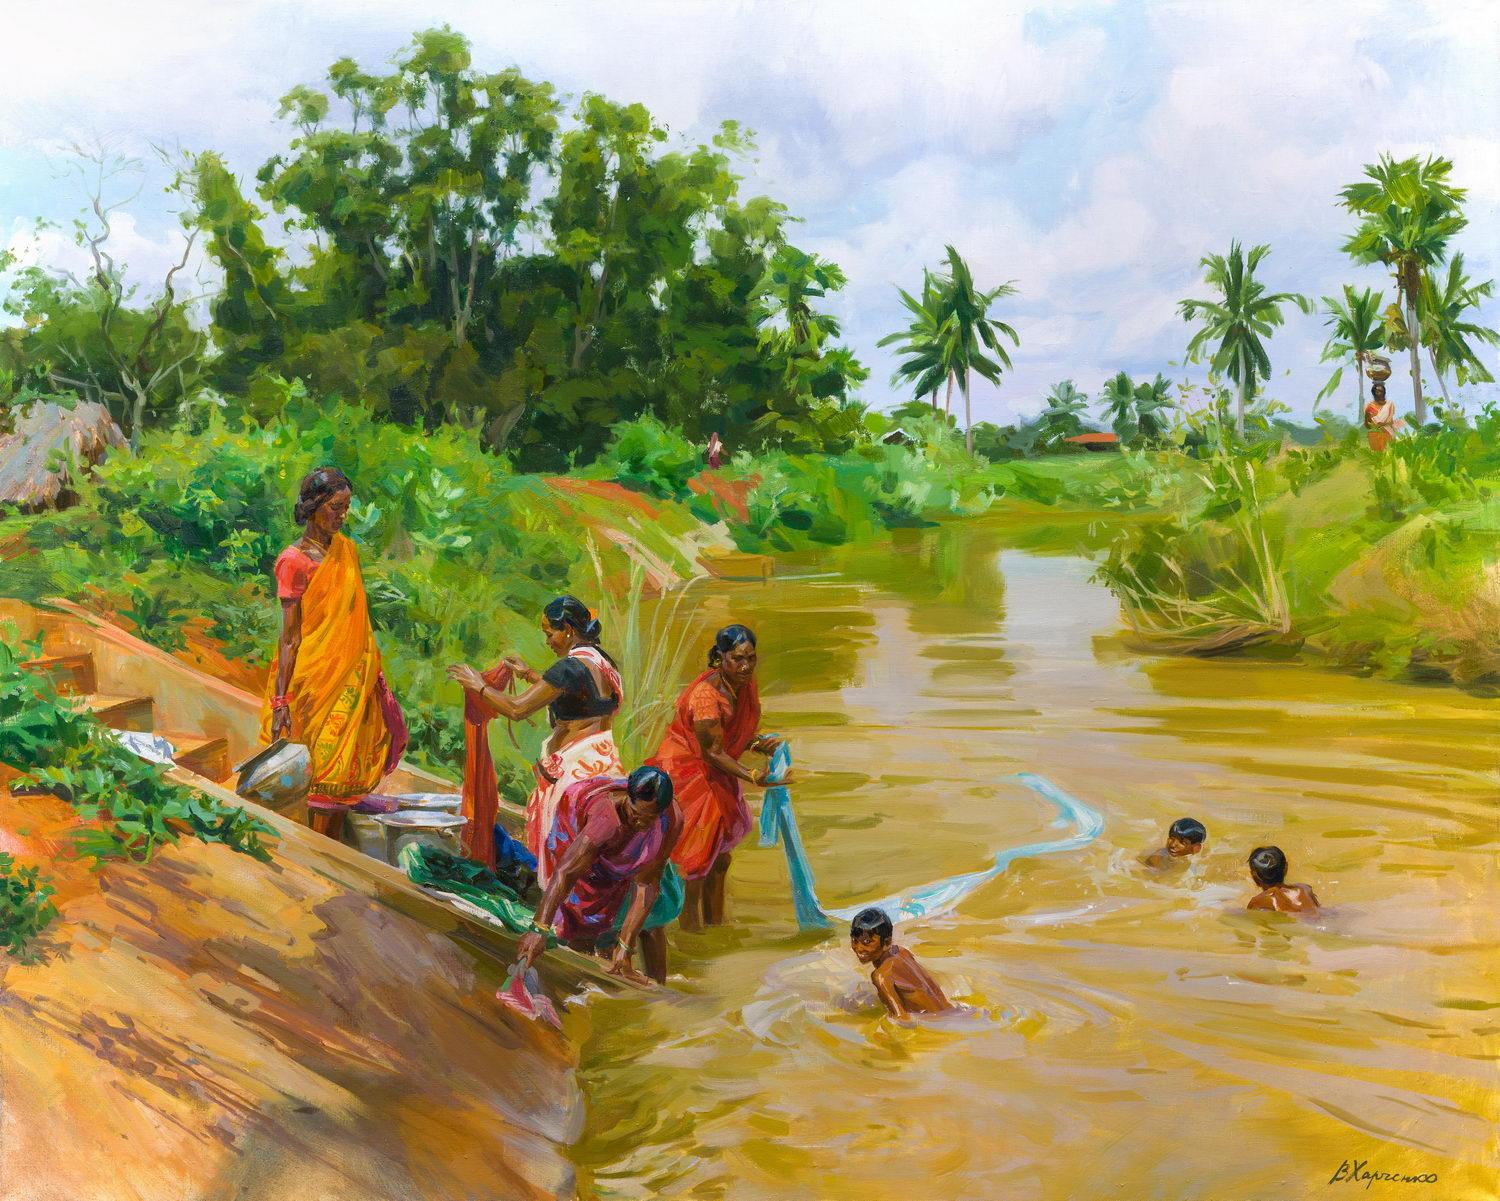 Life near the river